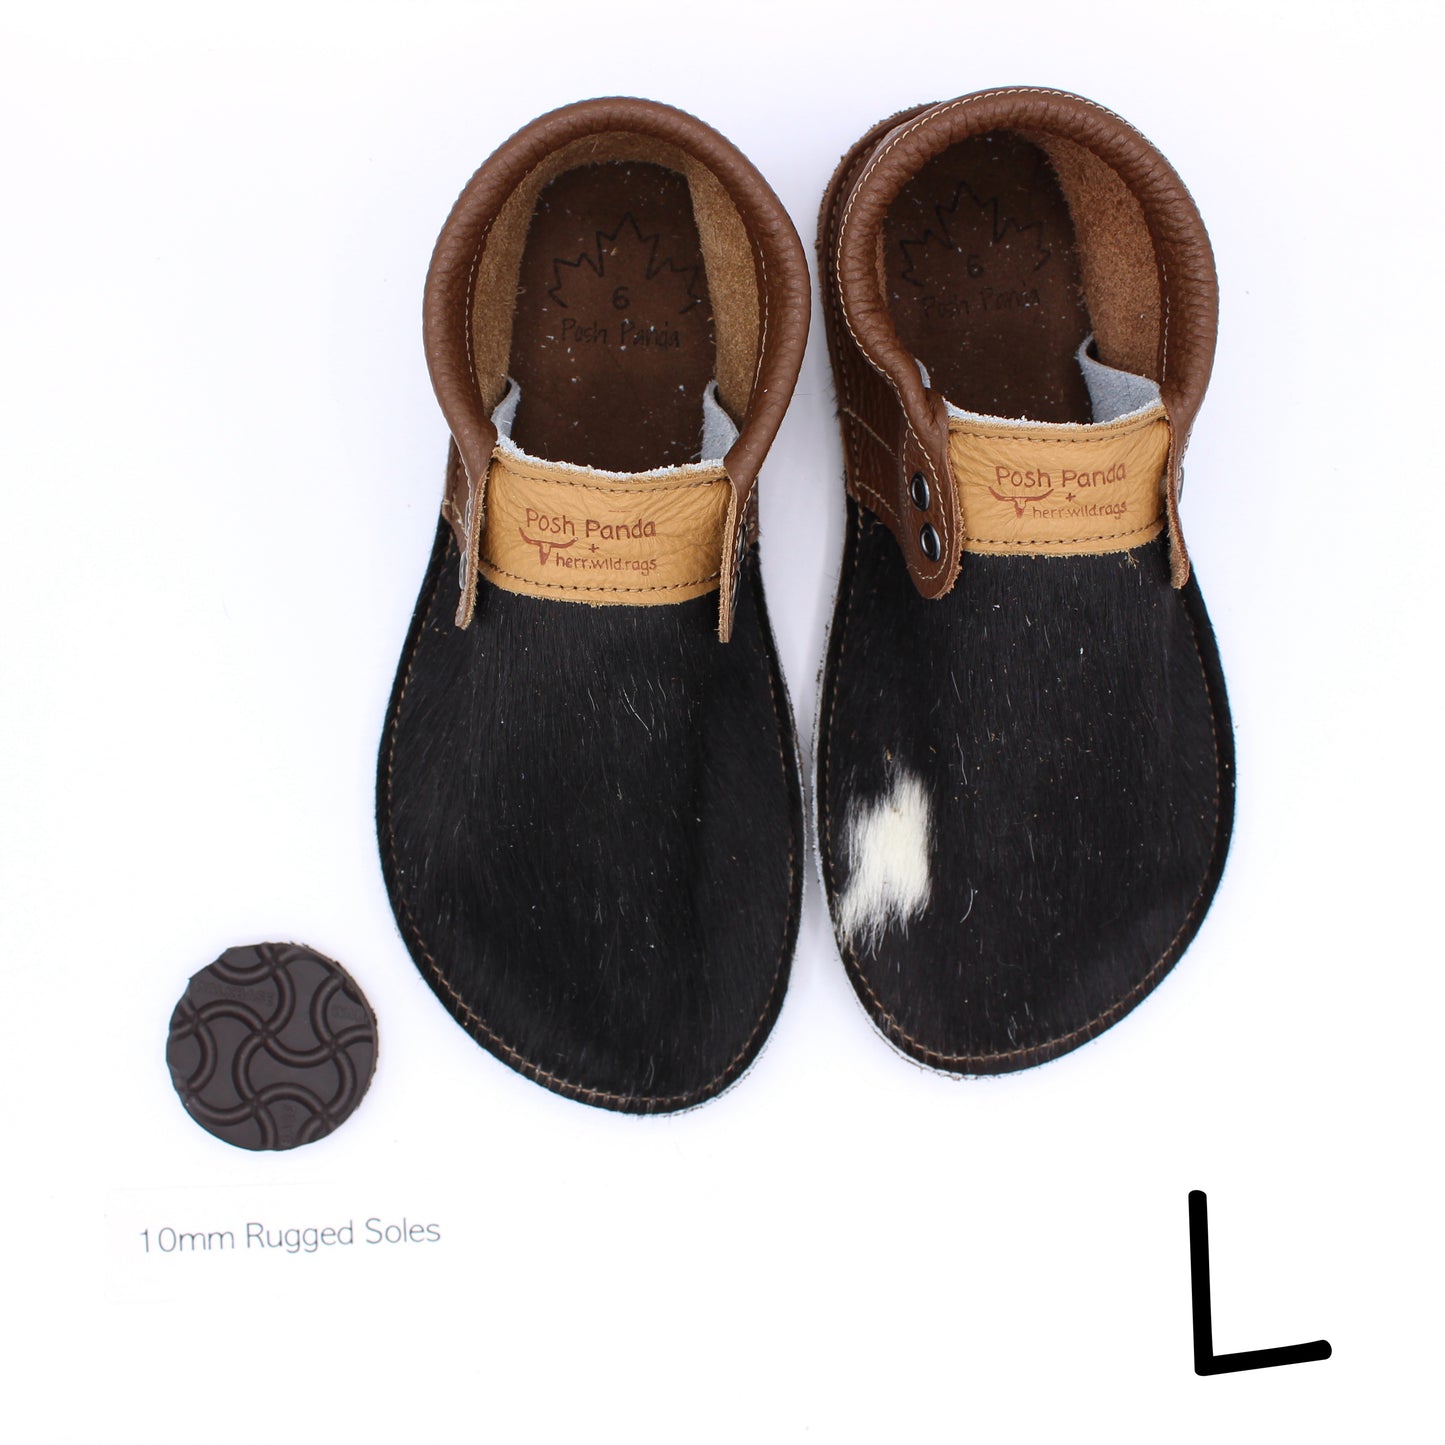 Hair Hide Collab Mocs - Ladies - SIZE 6 - RUGGED